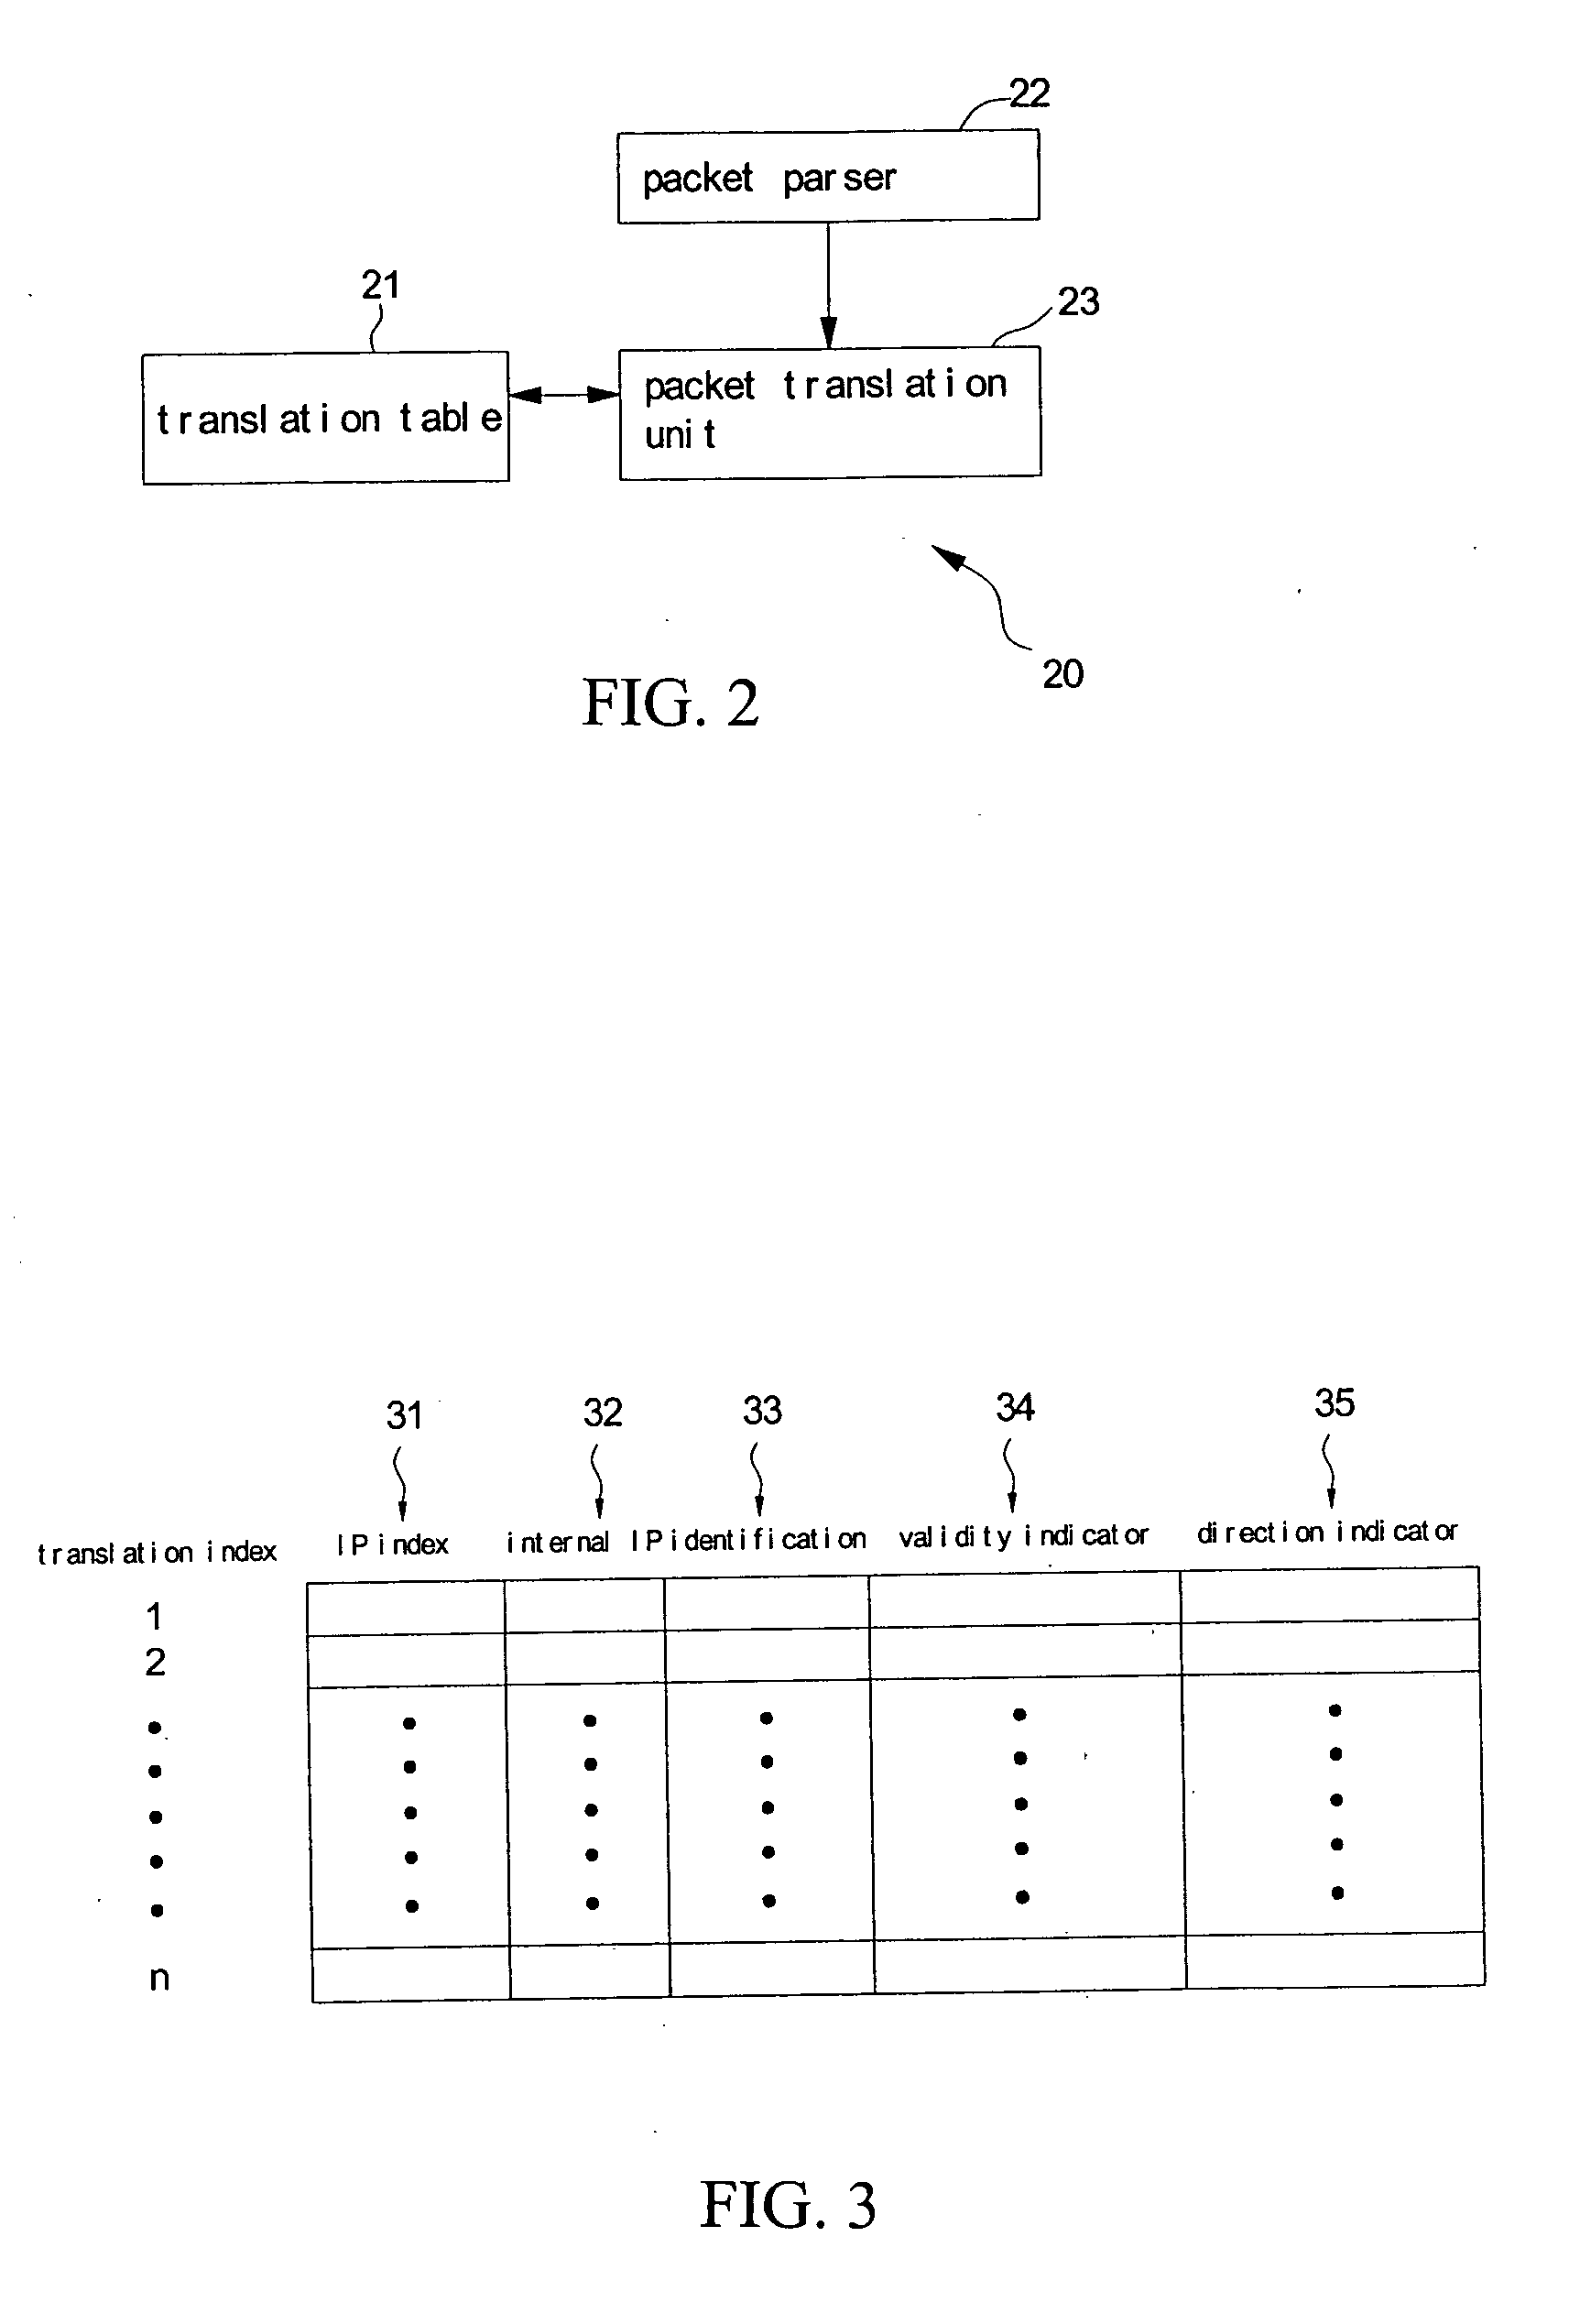 Network address-port translation apparatus and method for IP fragment packets